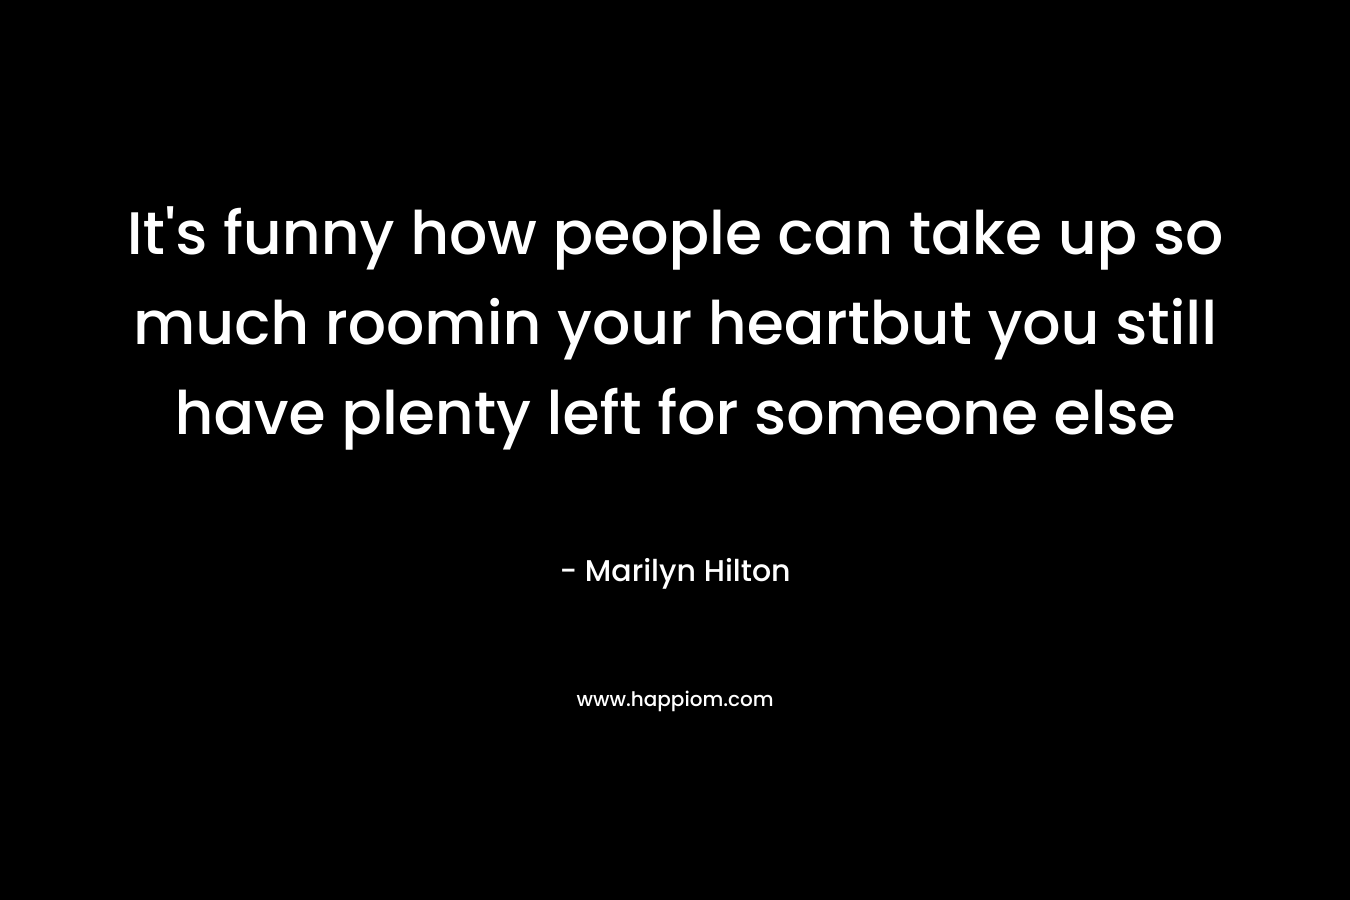 It's funny how people can take up so much roomin your heartbut you still have plenty left for someone else